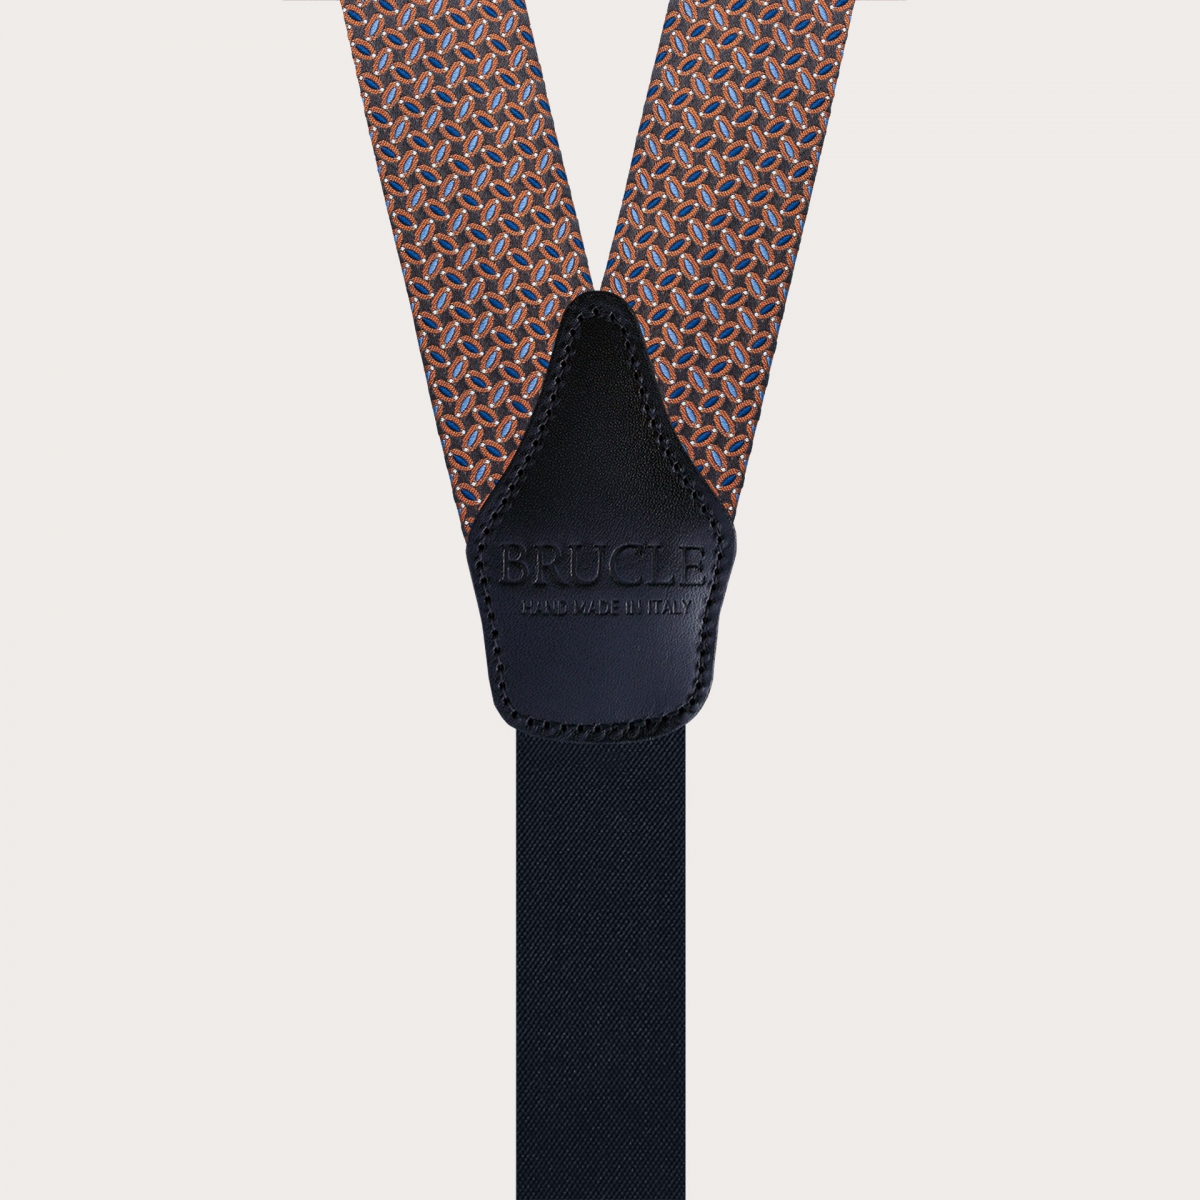 Refined silk suspenders with a micro-pattern in brown, light blue, blue, and orange